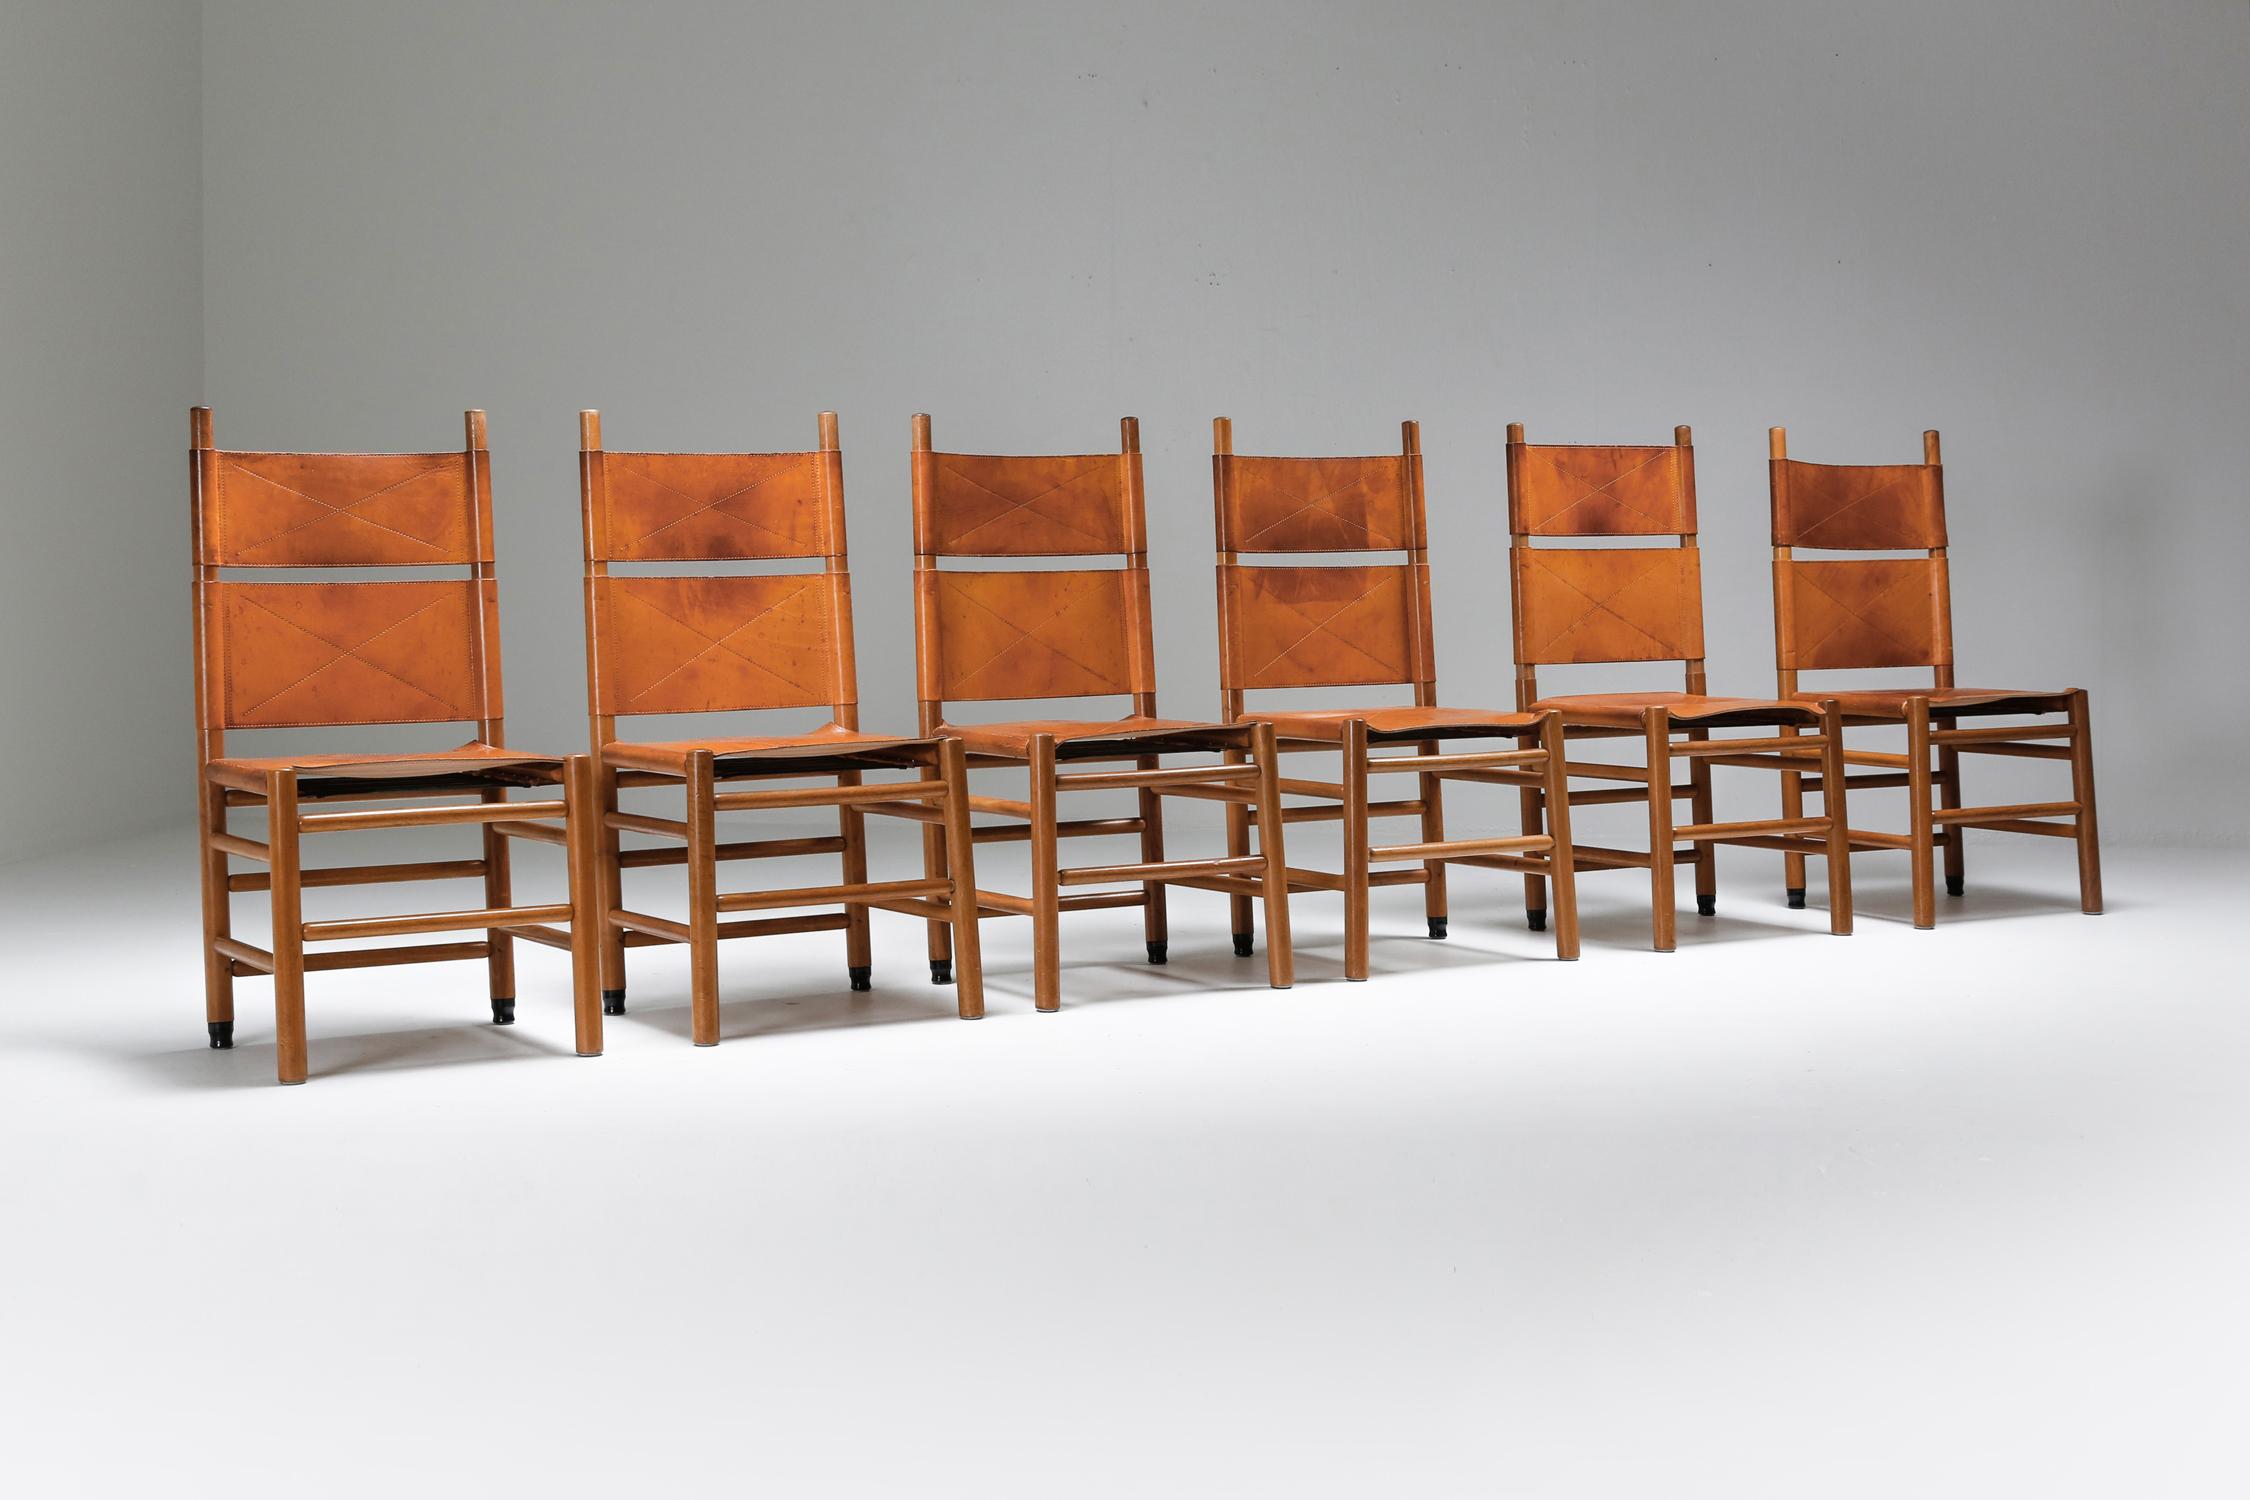 Scarpa; Afra & Tobia Scarpa; leather; dining chairs; mid-century; Italian Modern, Italy, 1970s; Scarpa; 

With their rectangular frames and the two-piece leather backrest, this set of dining chairs by Afra & Tobia Scarpa shows the true essence of